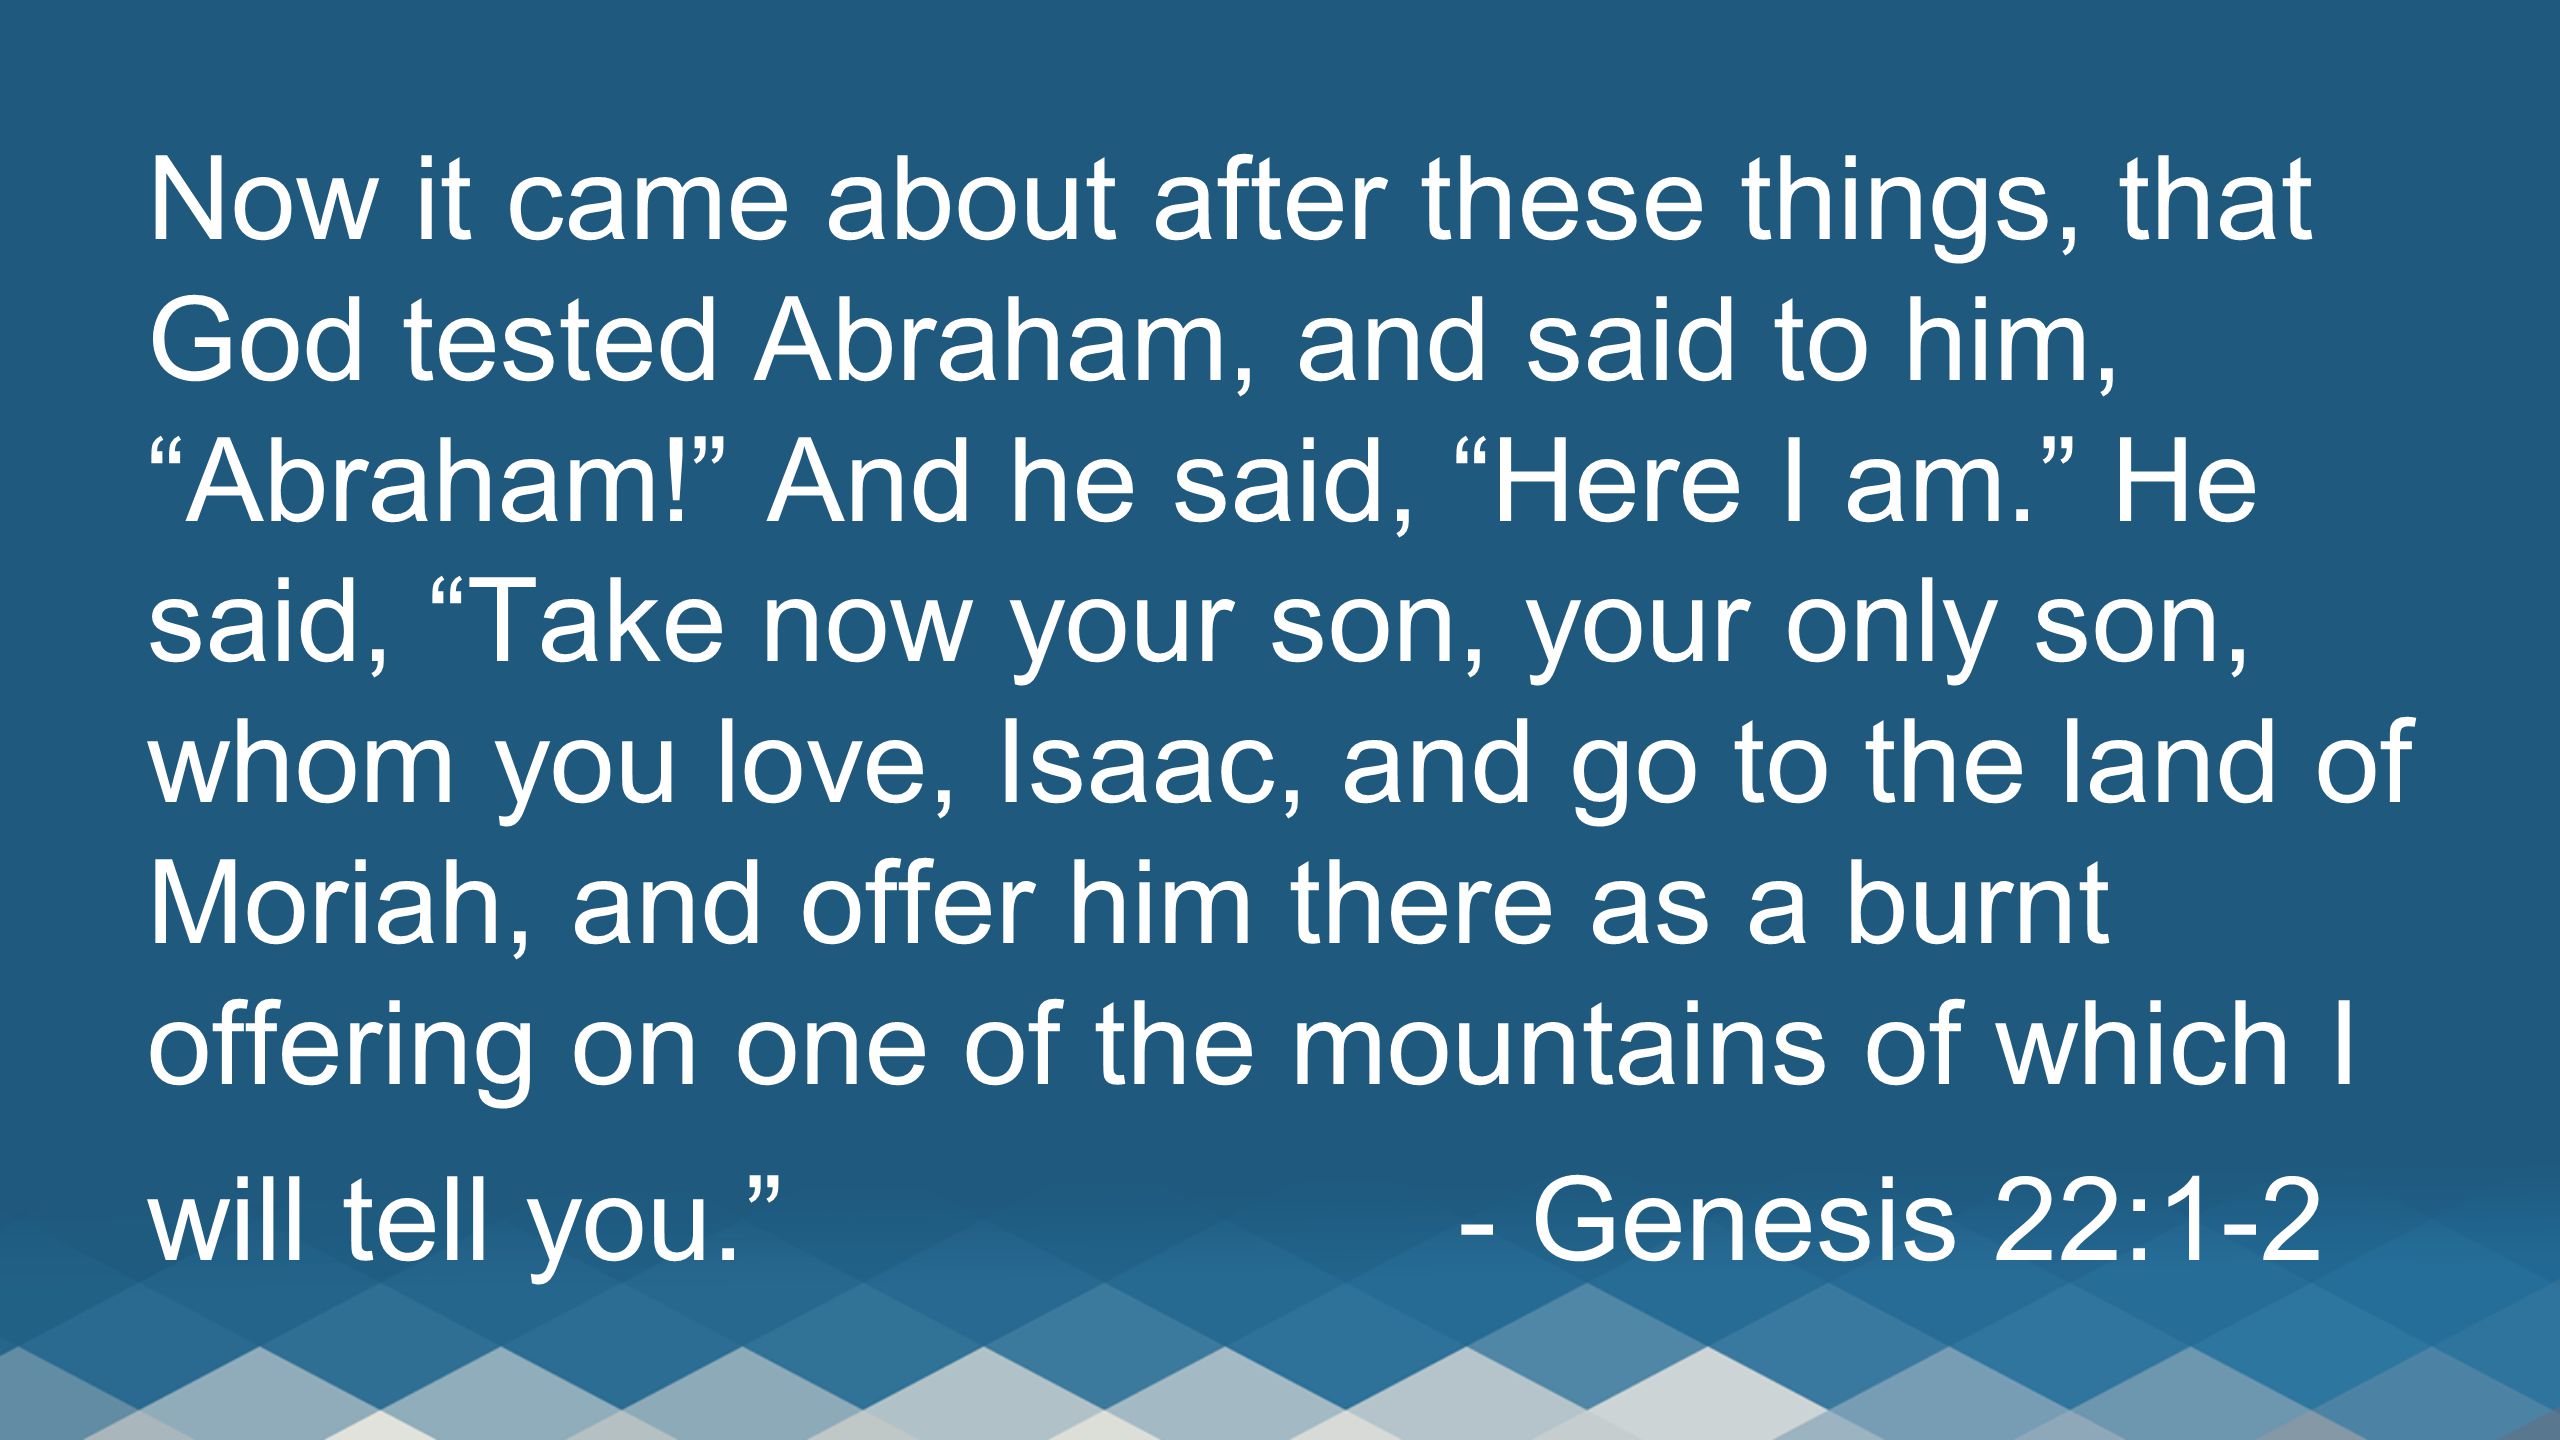 Now it came about after these things, that God tested Abraham, and said to him, Abraham! And he said, Here I am. He said, Take now your son, your only son, whom you love, Isaac, and go to the land of Moriah, and offer him there as a burnt offering on one of the mountains of which I will tell you. - Genesis 22:1-2